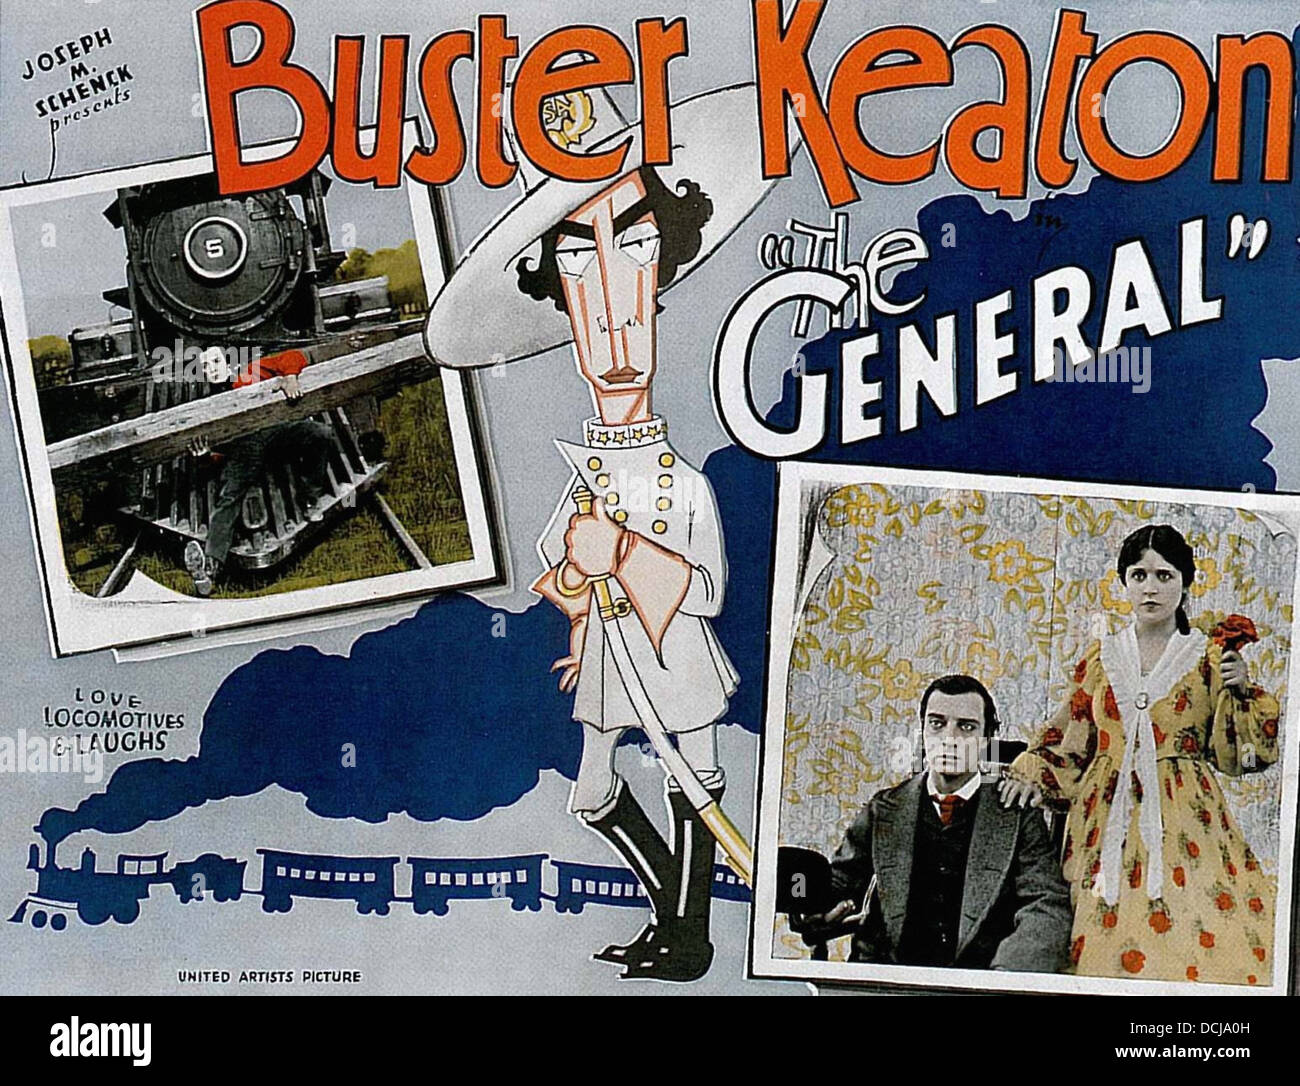 THE GENERAL - Buster Keaton Productions 1927 - Movie Poster Stock Photo